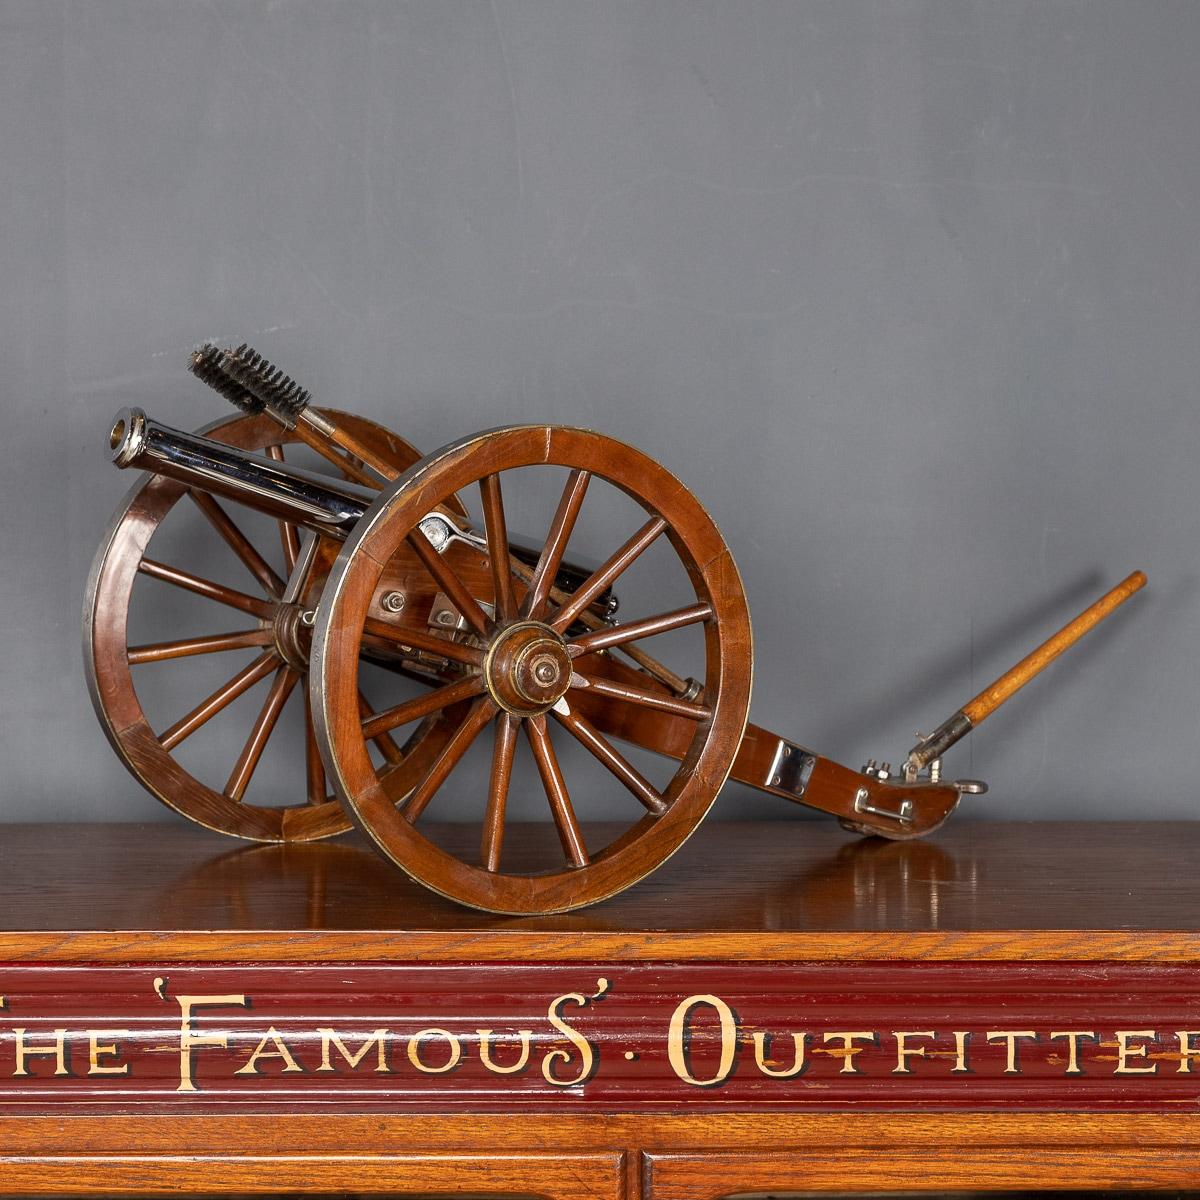 A mid 20th century a large model (approximately a quarter scale) of a 12 pound Cannon Field Gun, used during the Napoleonic Wars 1857. With wooden wheels and shaft and polished metal cannon with details. This items makes for a fantastic conversation